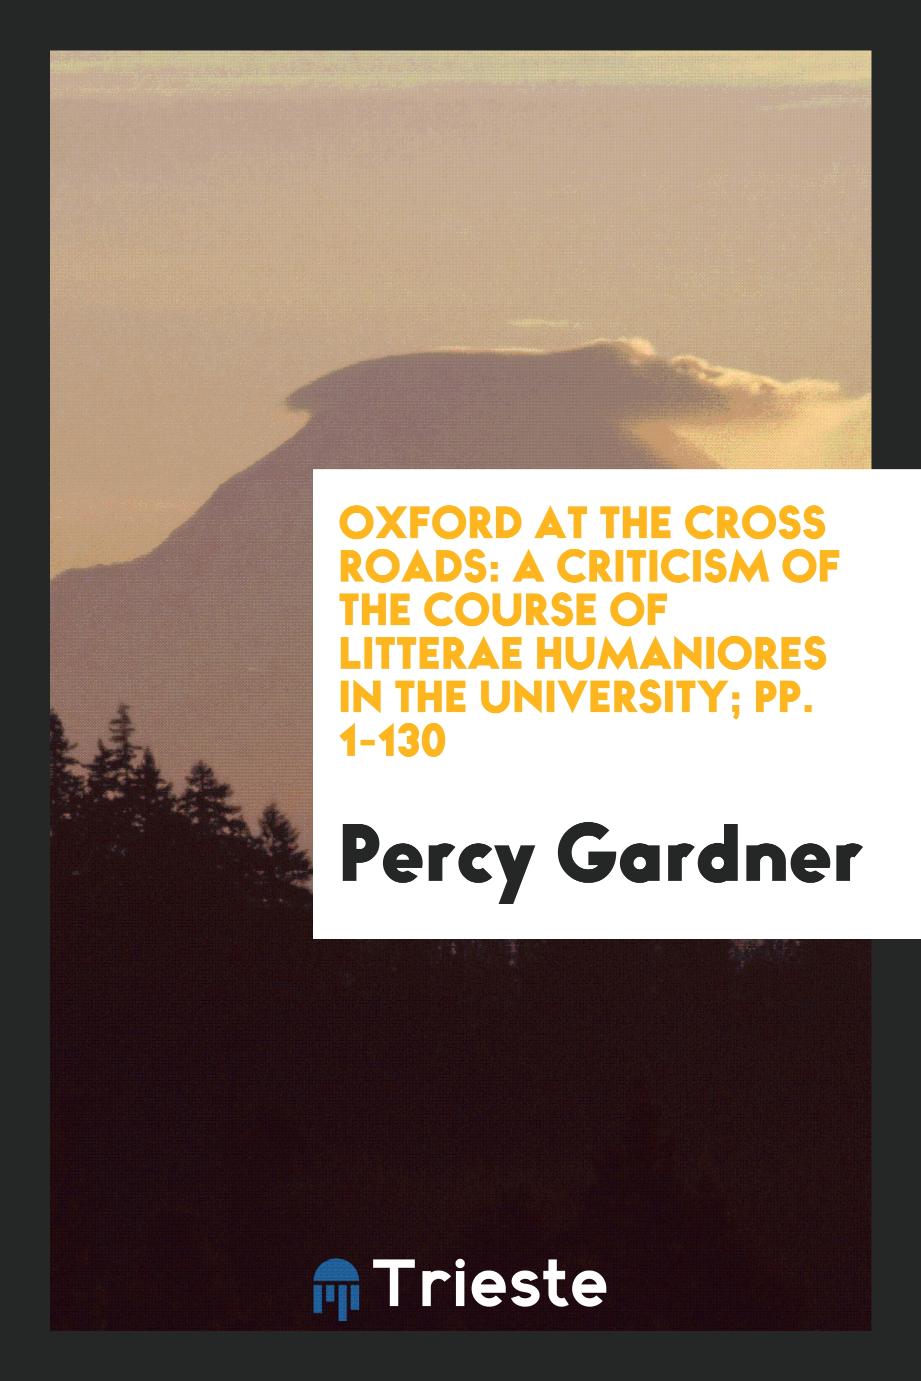 Oxford at the Cross Roads: A Criticism of the Course of Litterae Humaniores in the University; pp. 1-130